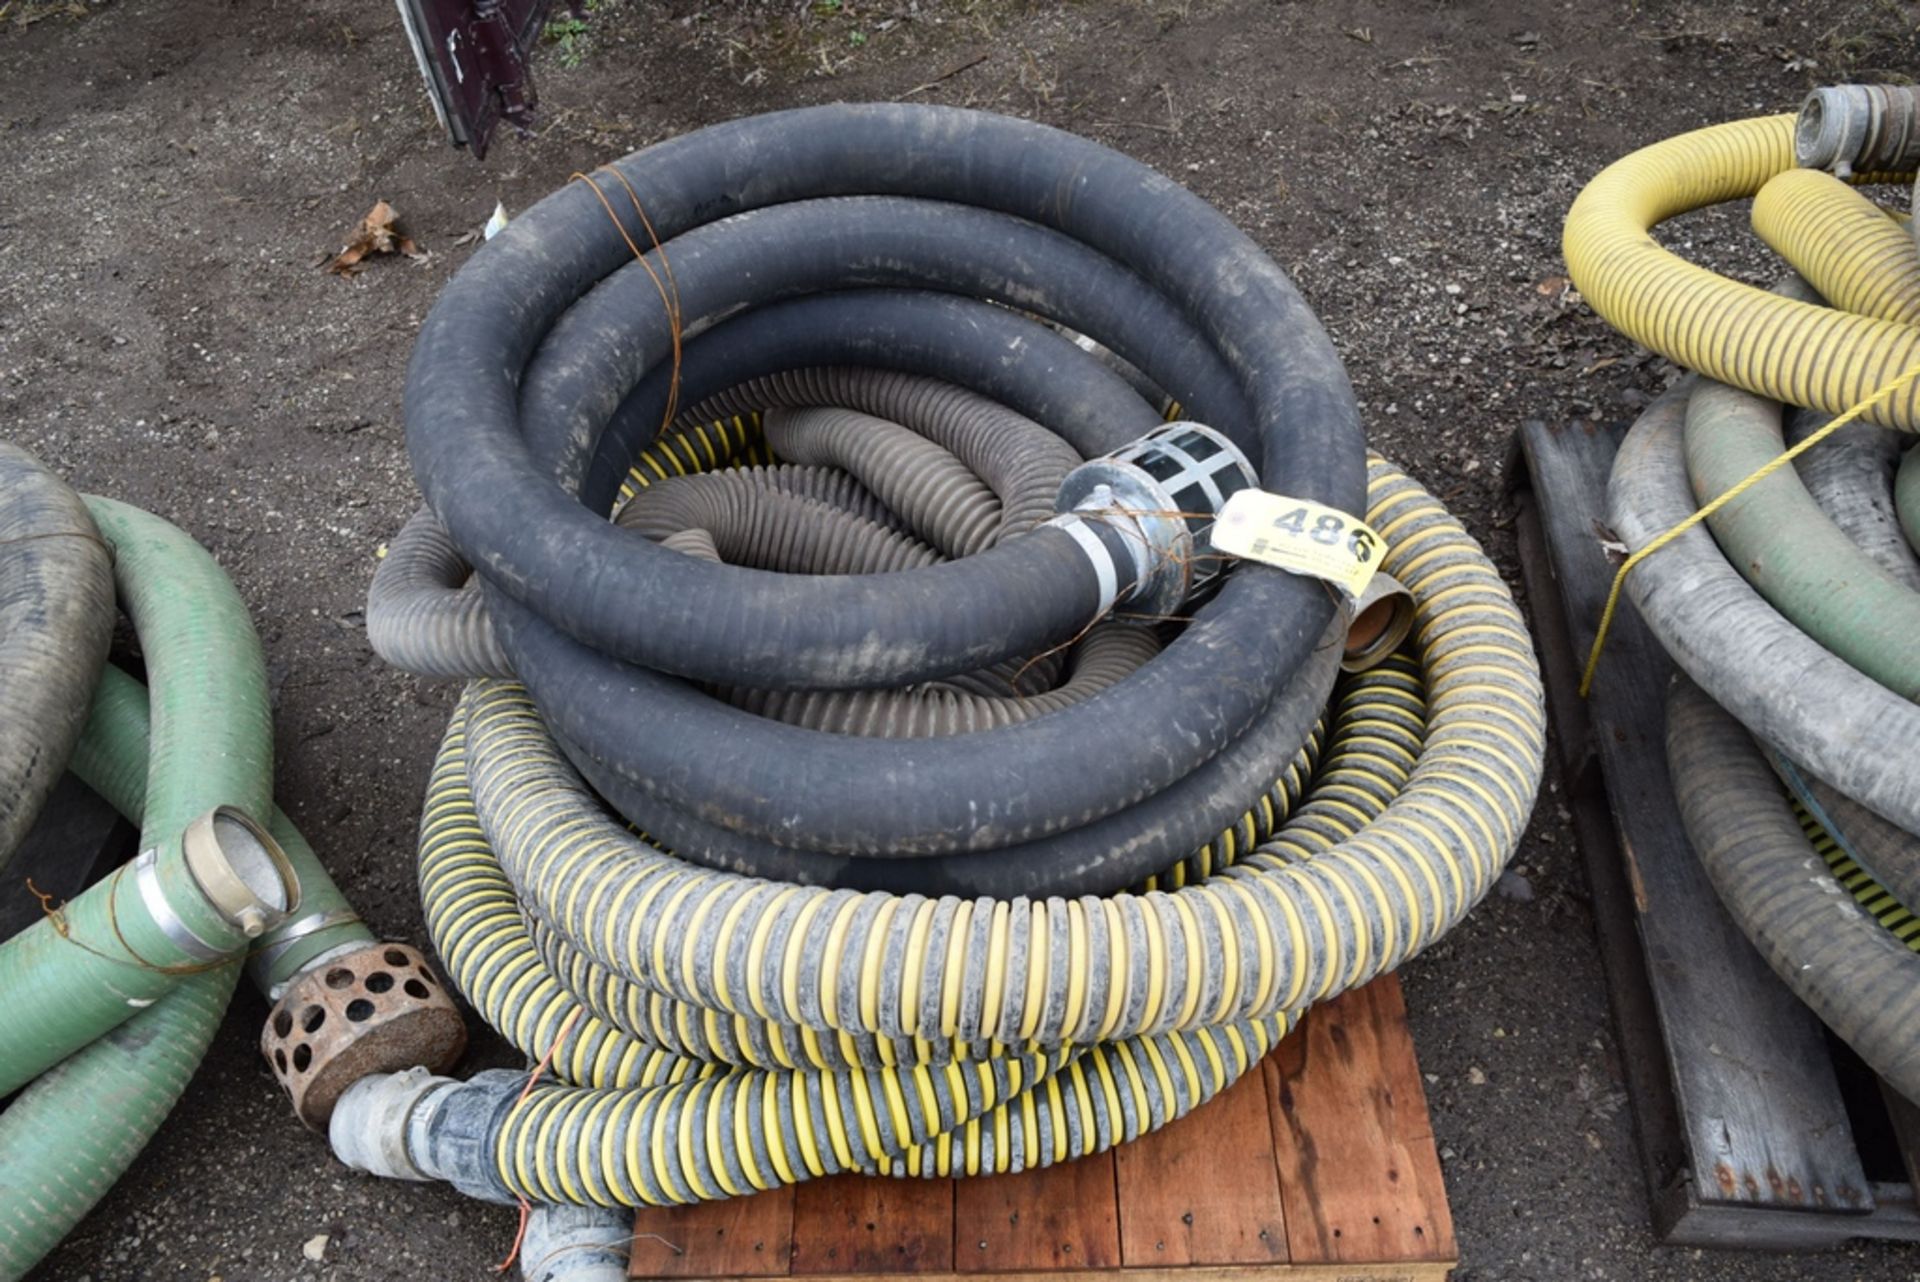 ASSORTED SIZED DISCHARGE HOSES ON ONE SKID